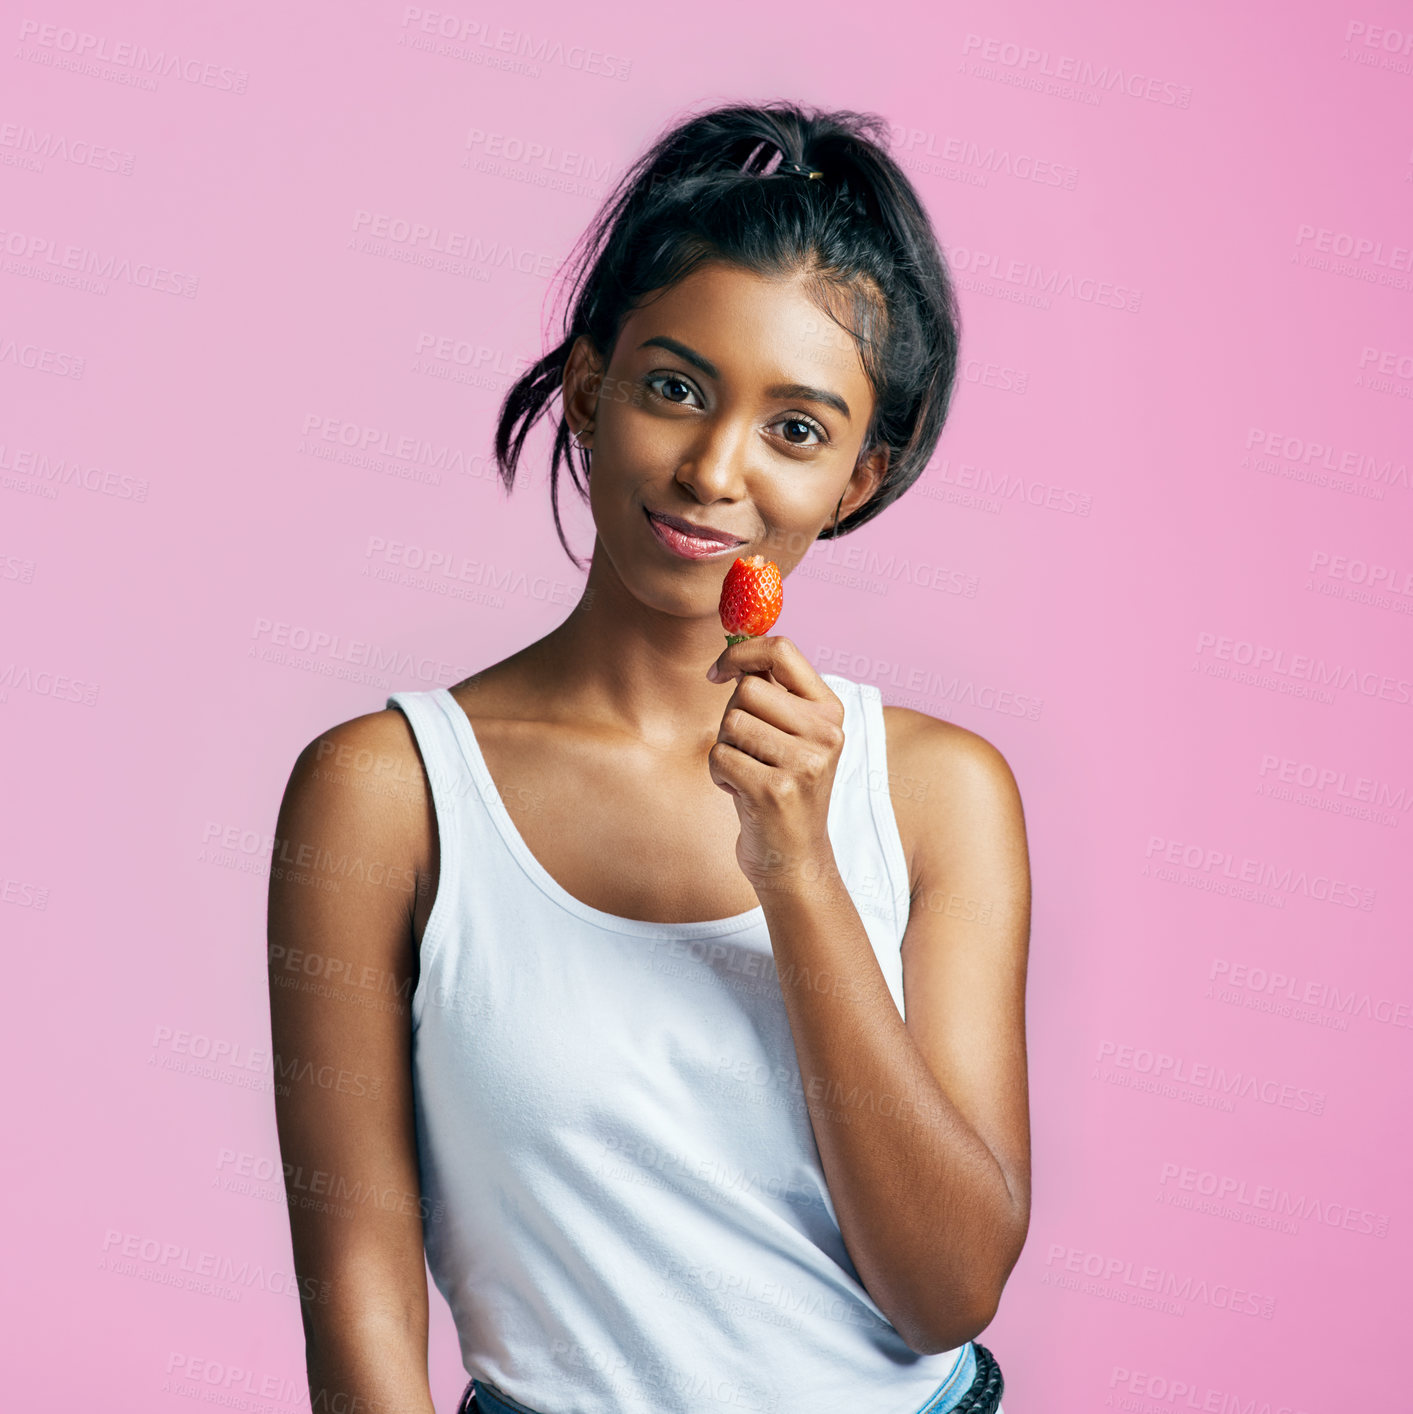 Buy stock photo Studio portrait of a beautiful young woman eating a strawberry against a pink background